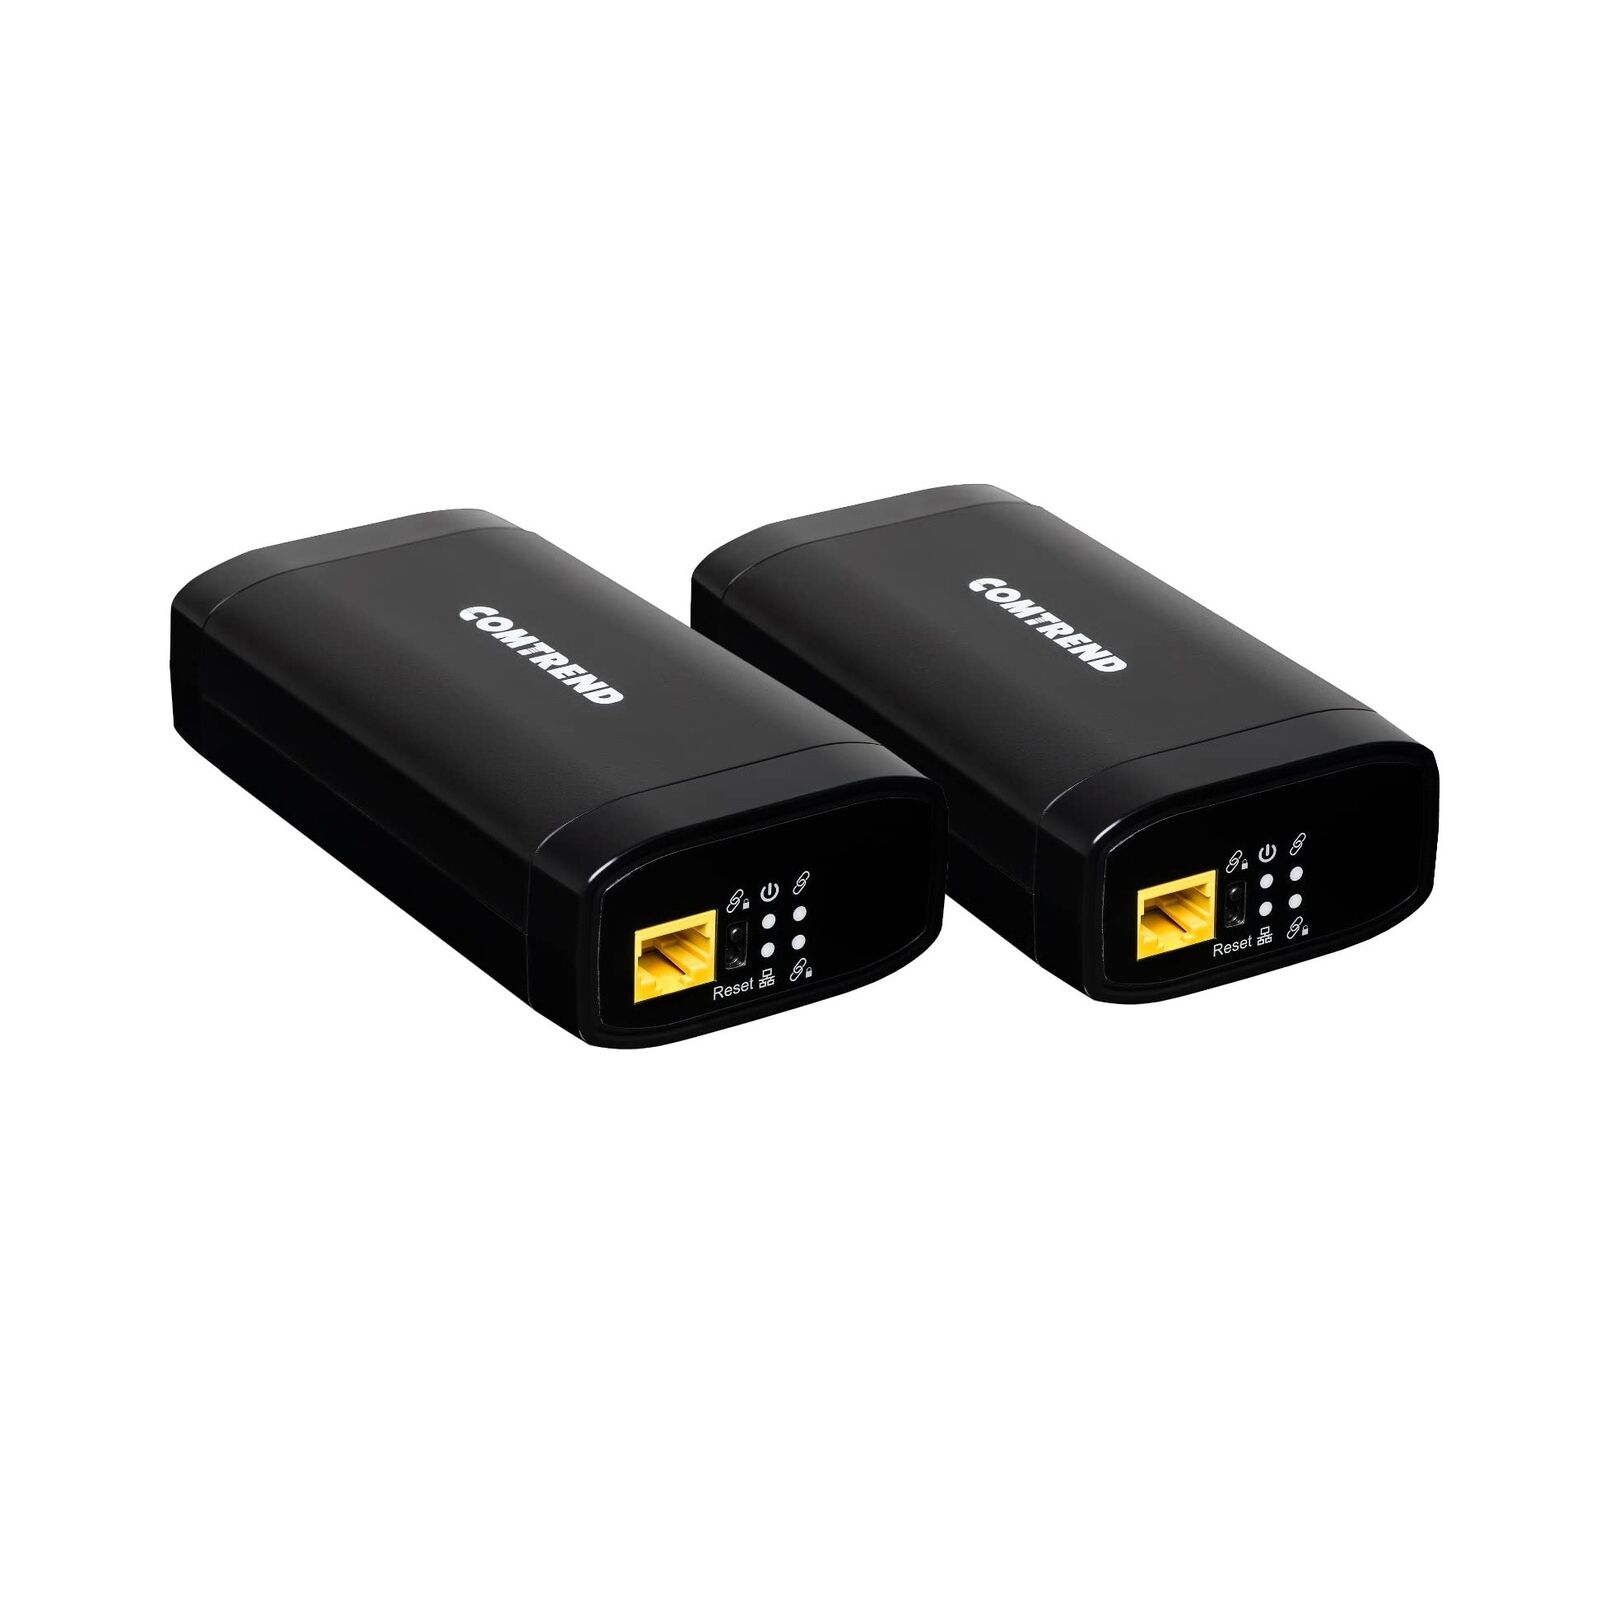 Comtrend G.hn Ethernet Over Coax Adapter | 2 Gbps, Fast and Secure Network Pe...